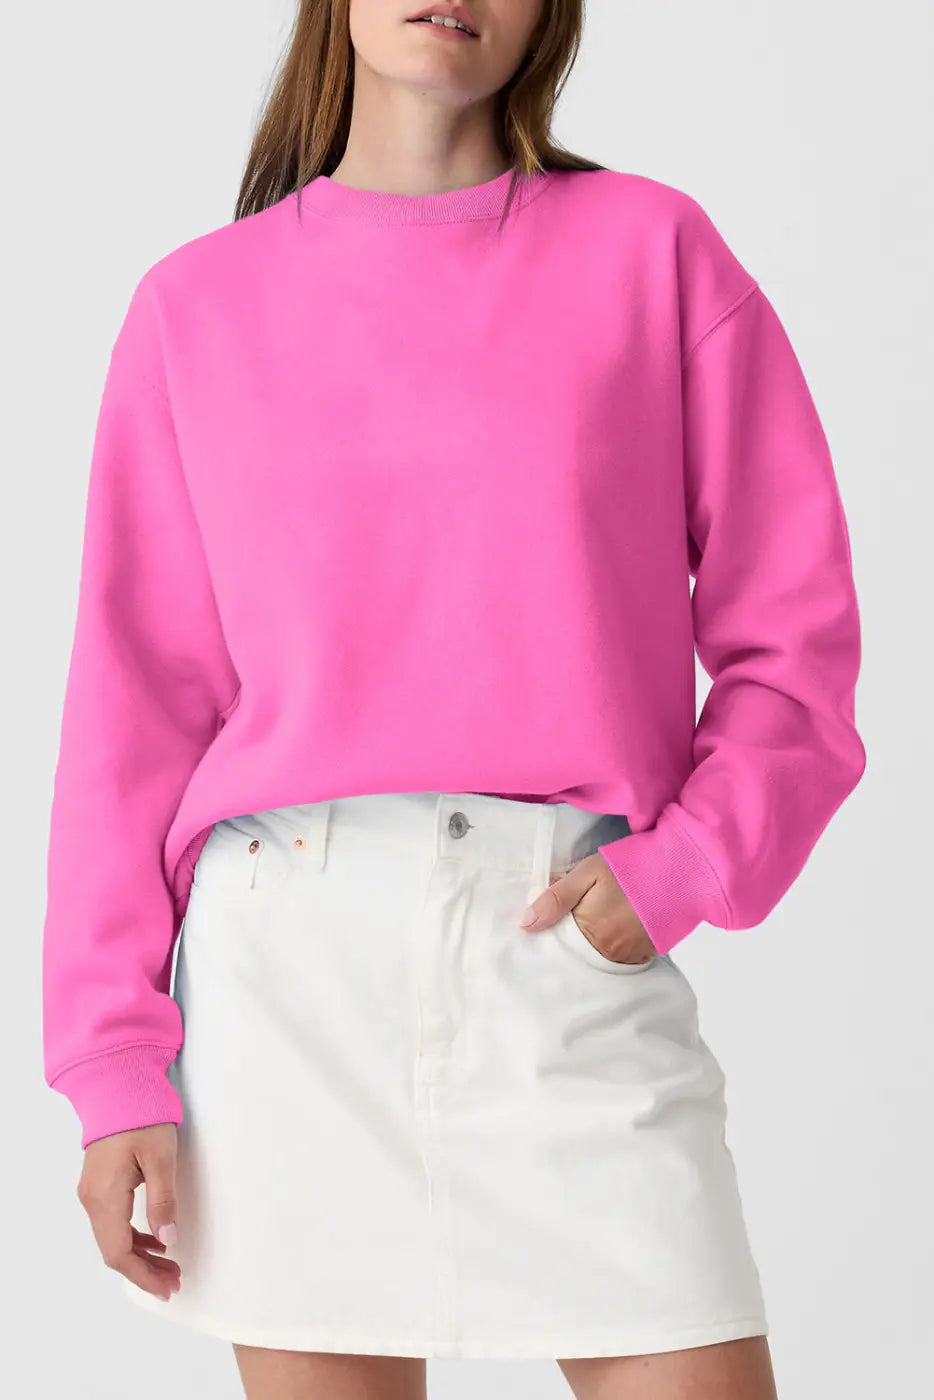 Relaxed fit terry sweatshirt - bonbon / s / 50% polyester + 50% cotton - sweatshirts